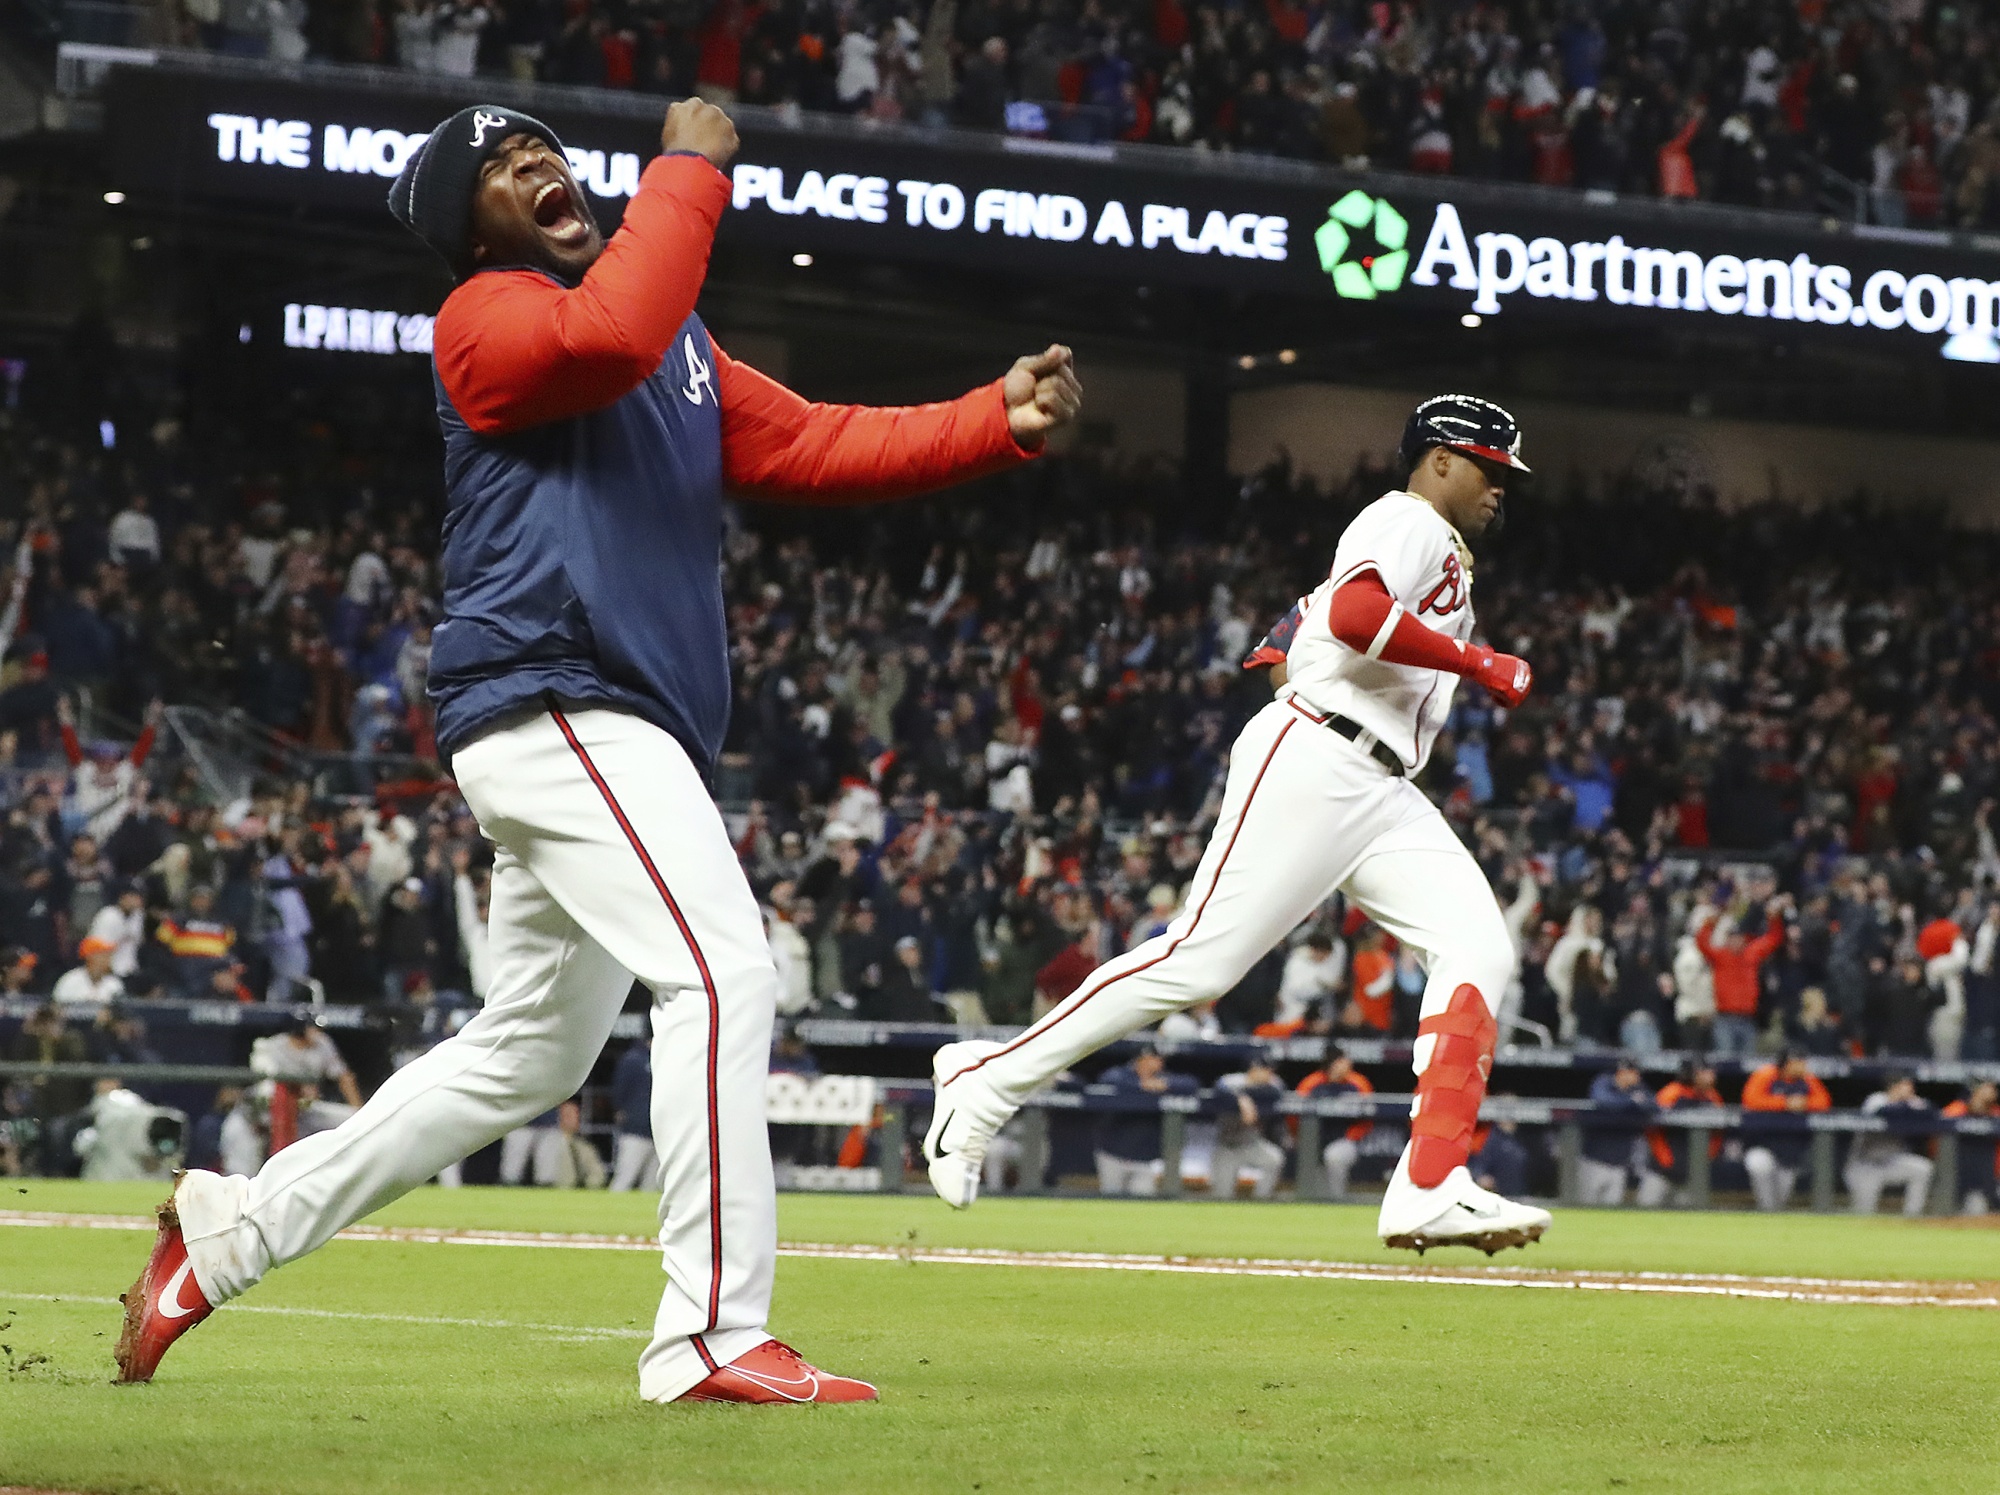 Unlikely Hero, 2 HRs Carry Braves to Brink of Series Title - Bloomberg